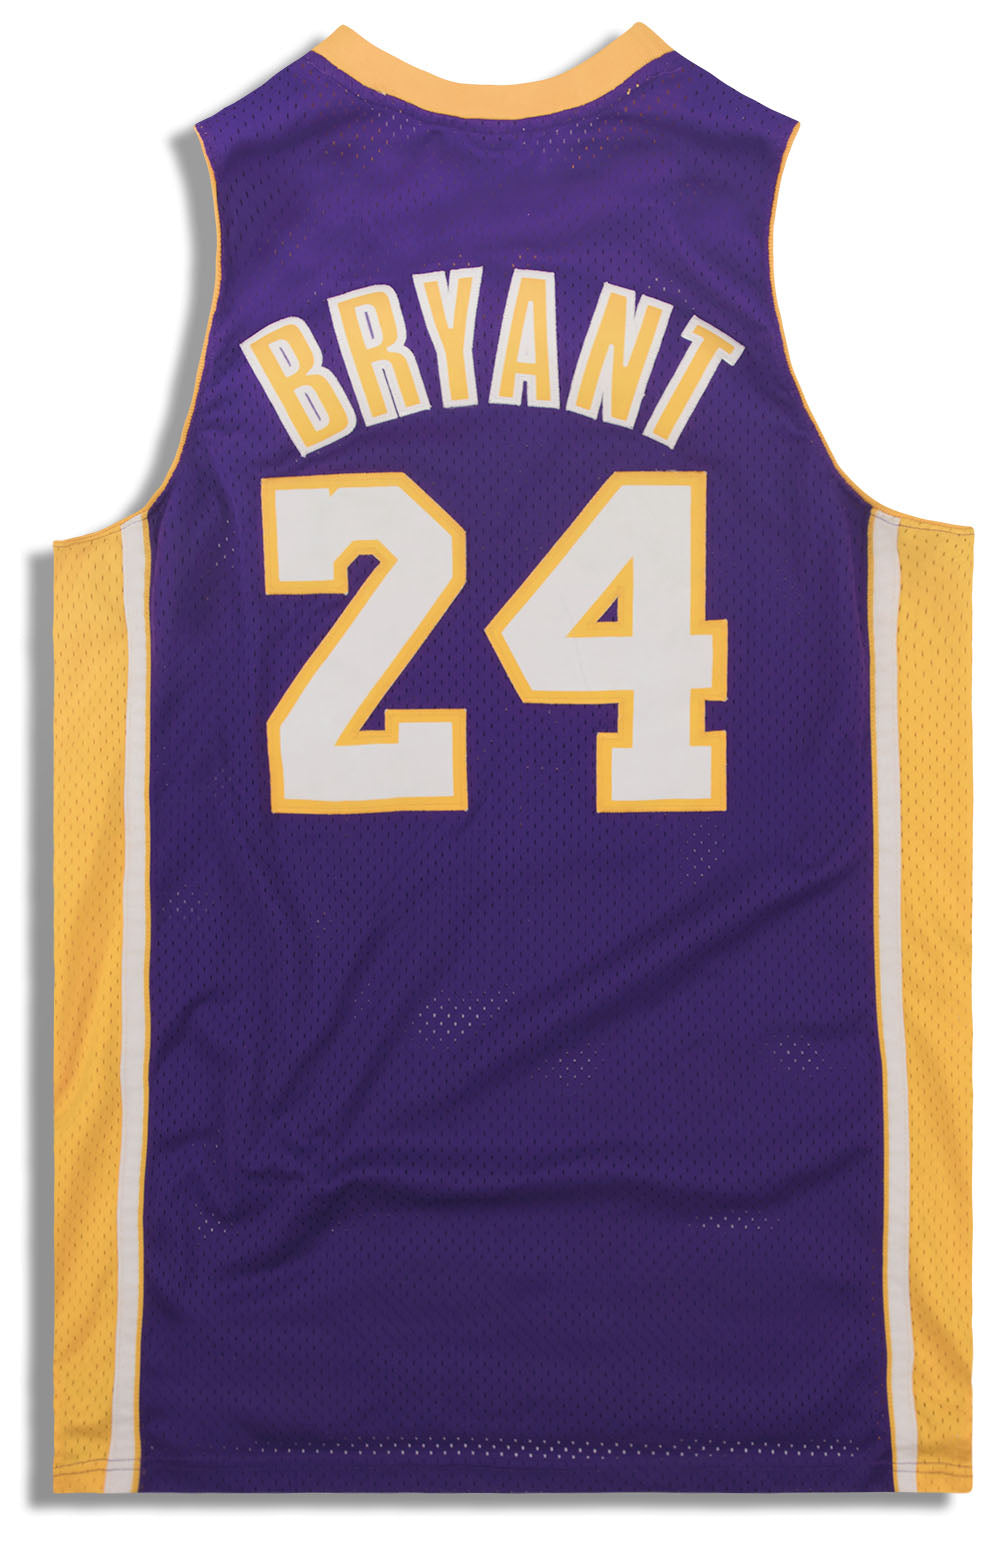 2006-10 LA LAKERS BRYANT #24 ADIDAS JERSEY (HOME) Y